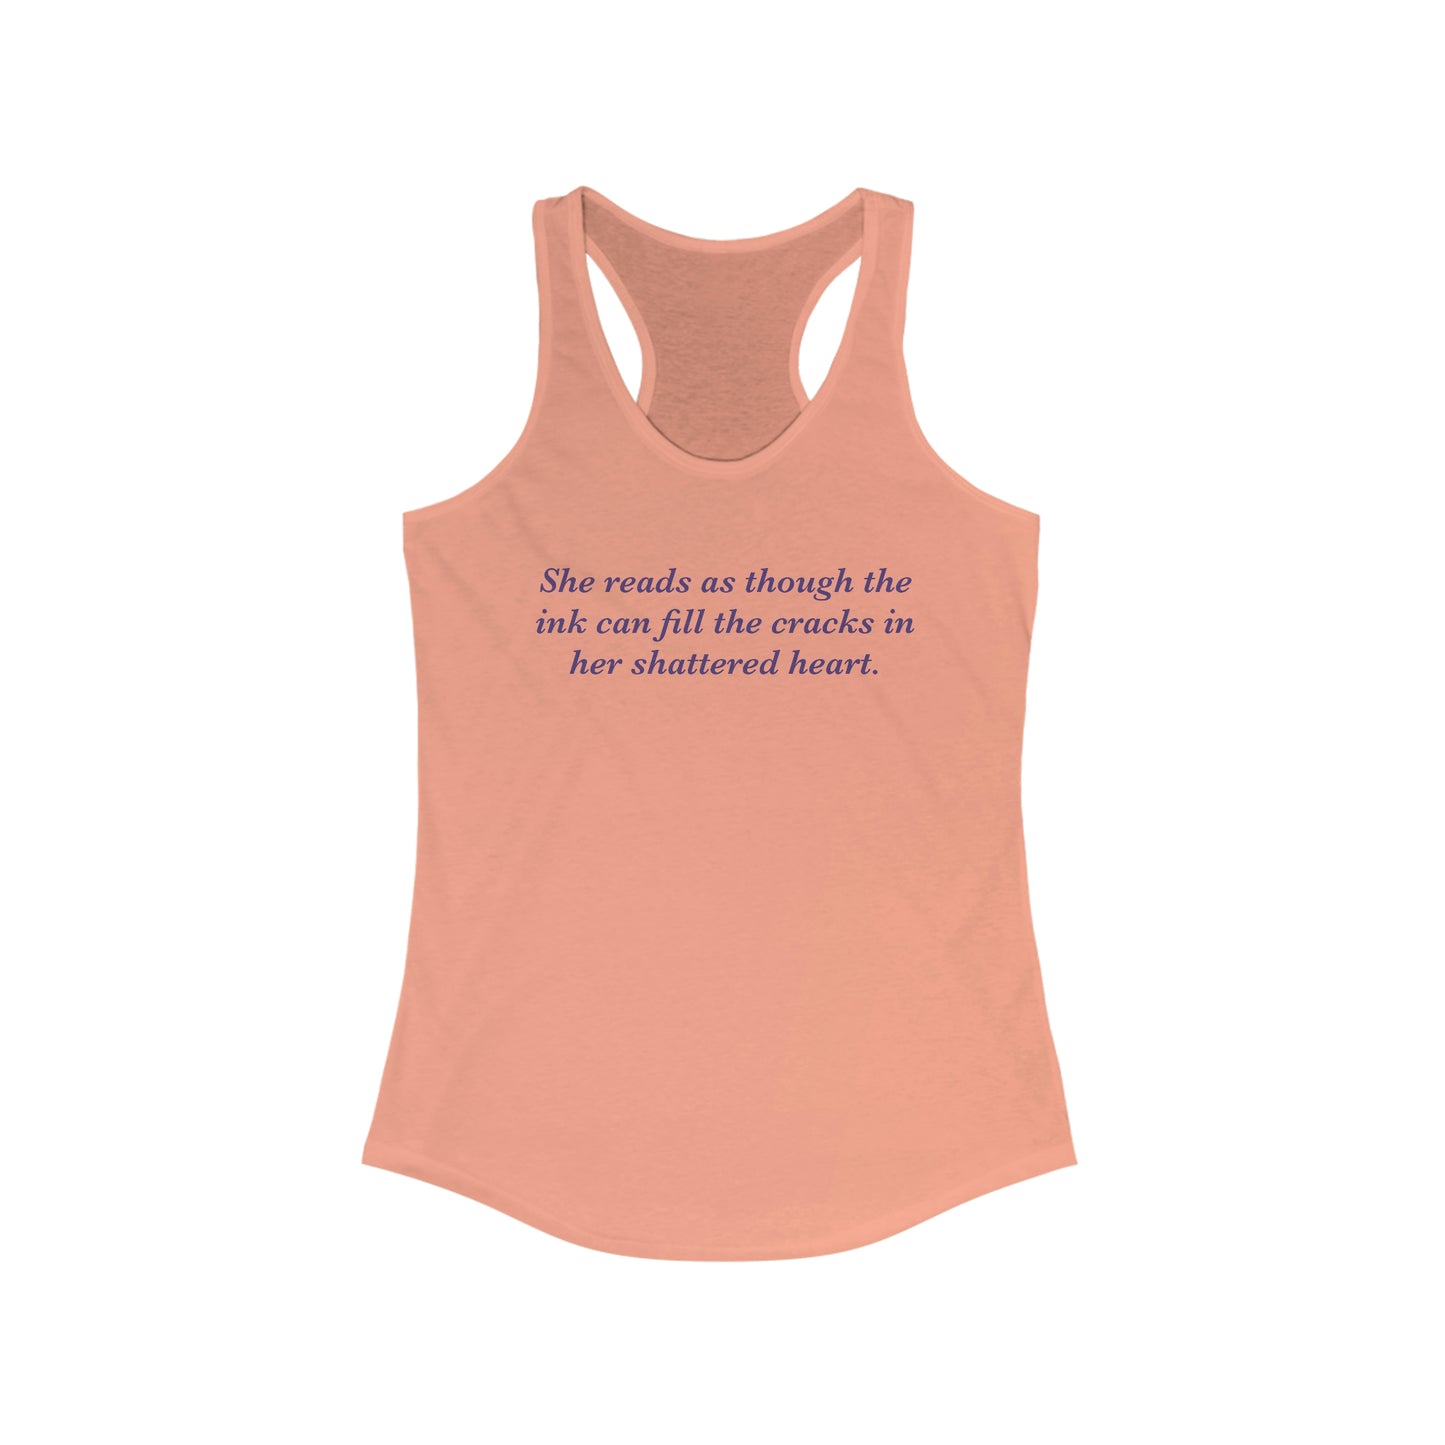 Reads To Fill Her Shattered Heart Women's Ideal Racerback Tank